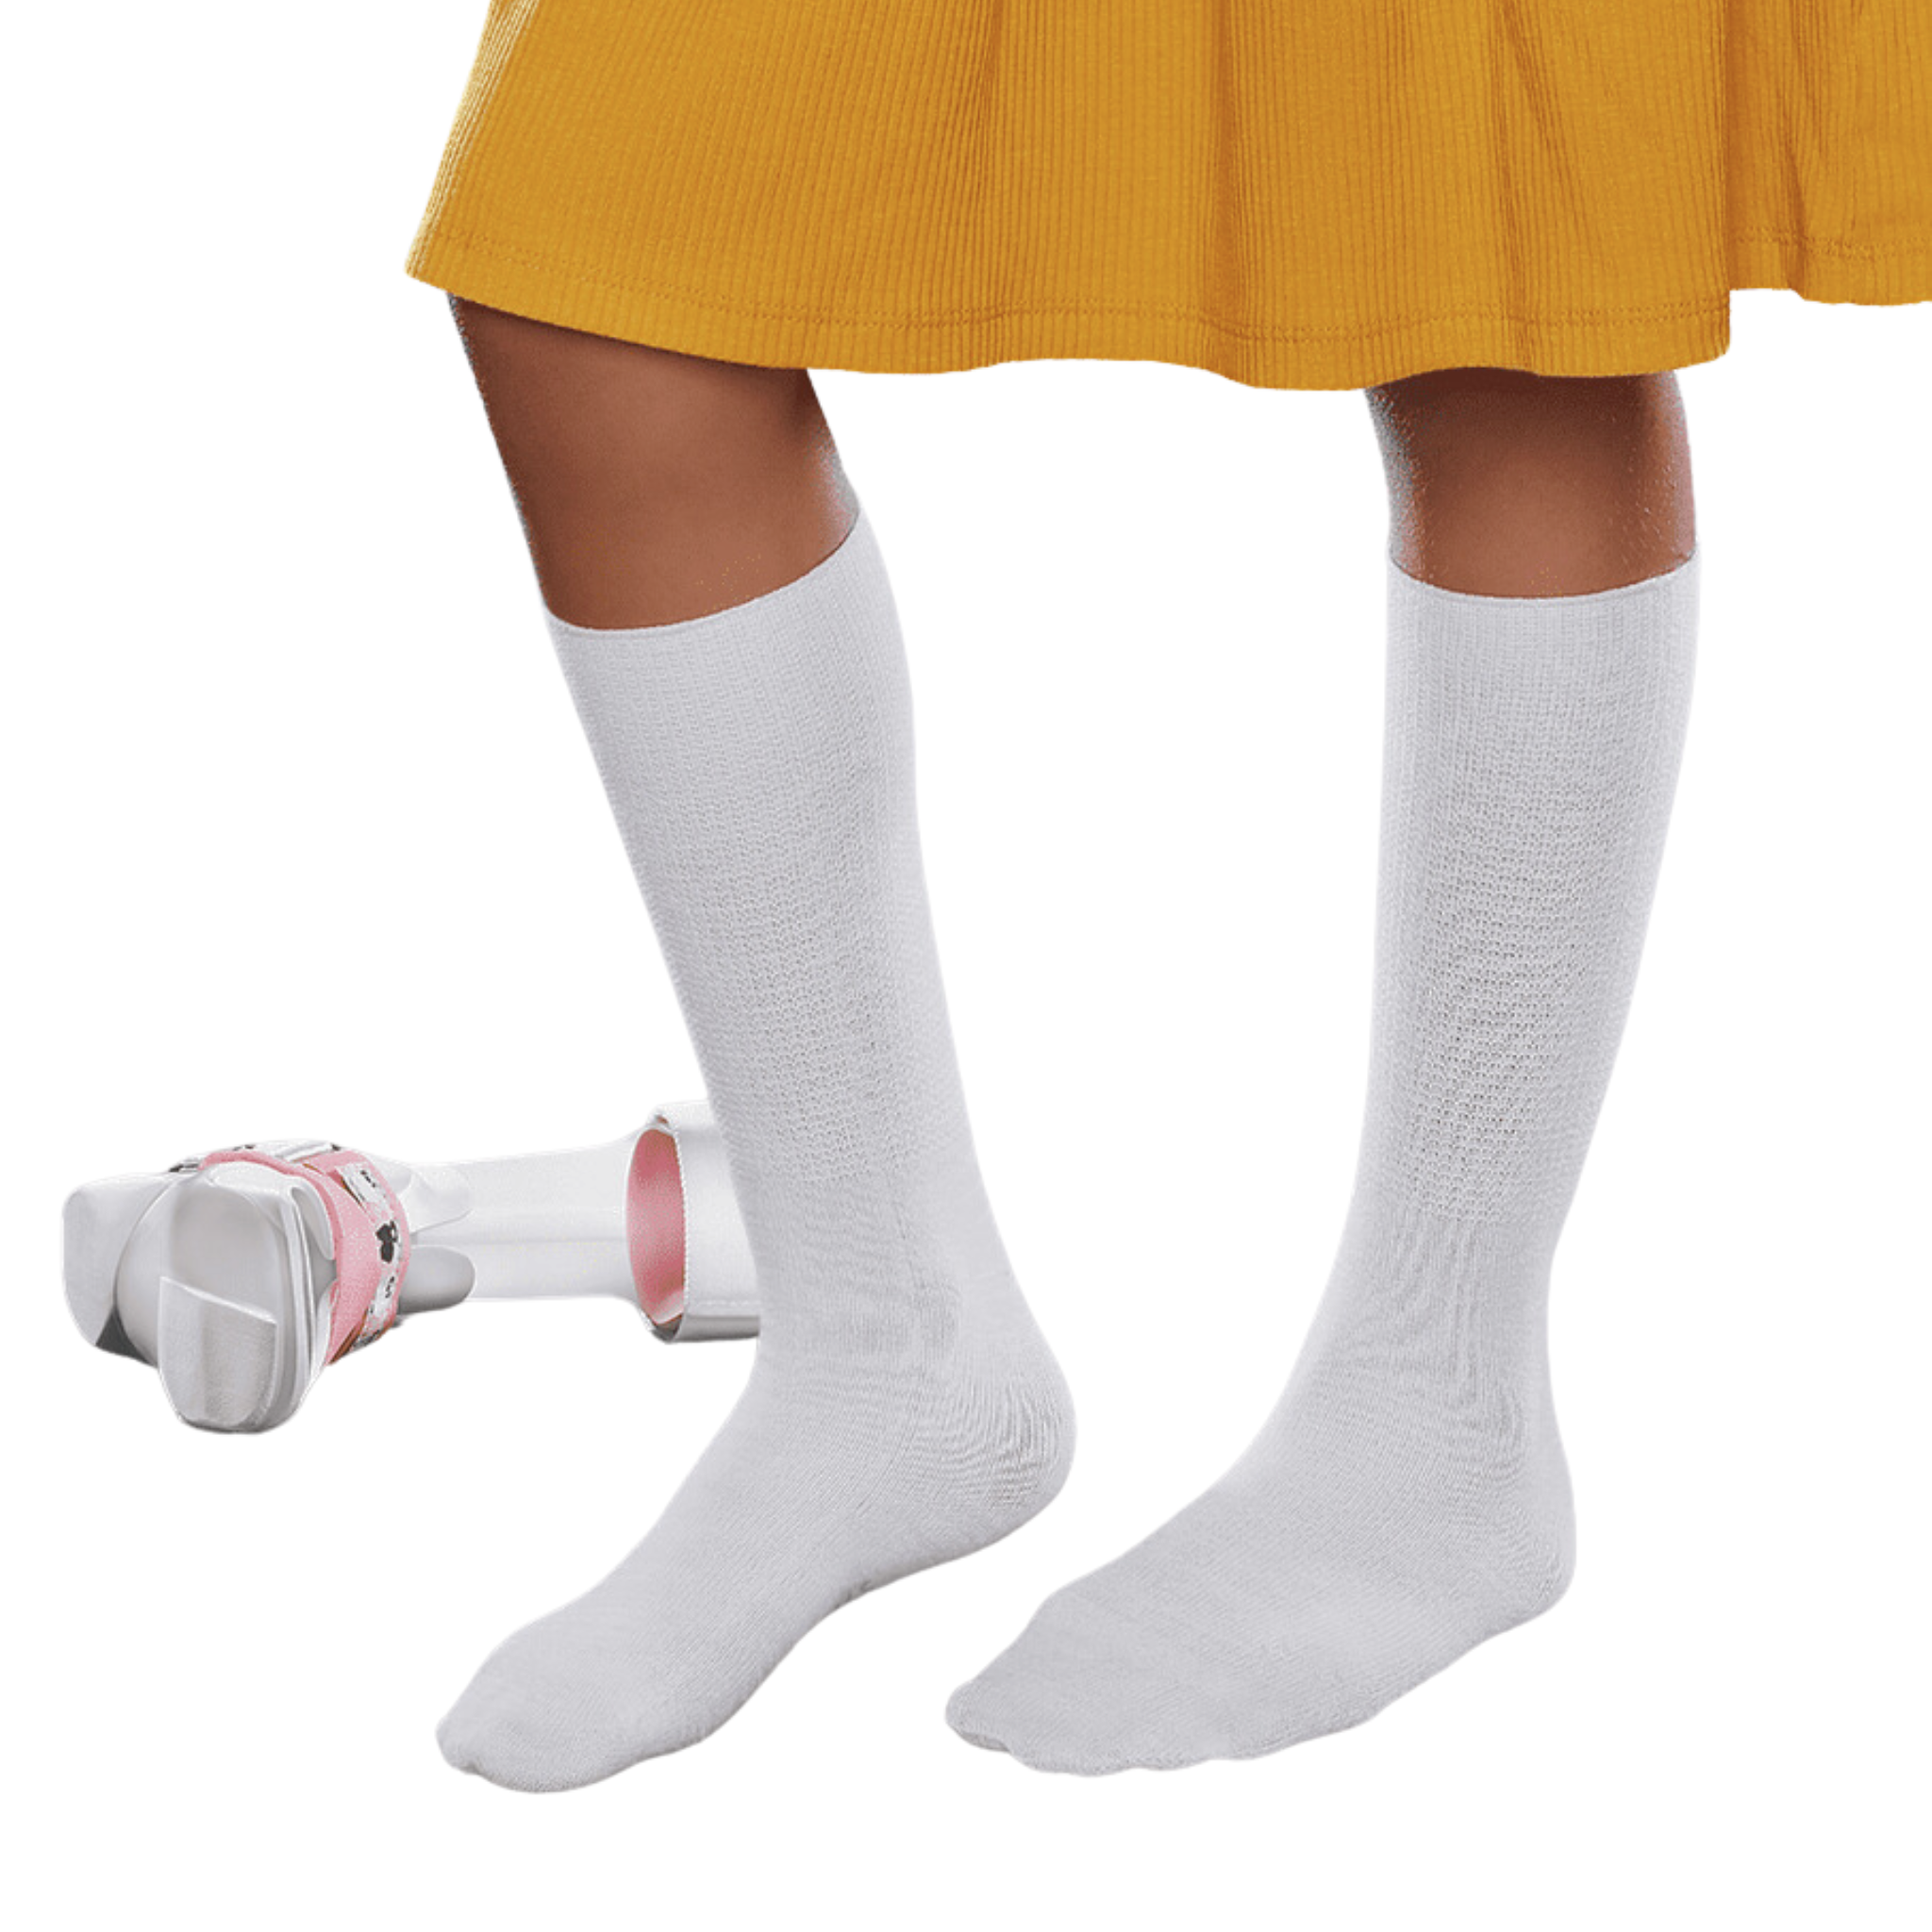 Knitrite - AFO (Ankle Foot Orthosis) Interface Seamless Socks for children (Extra Long)